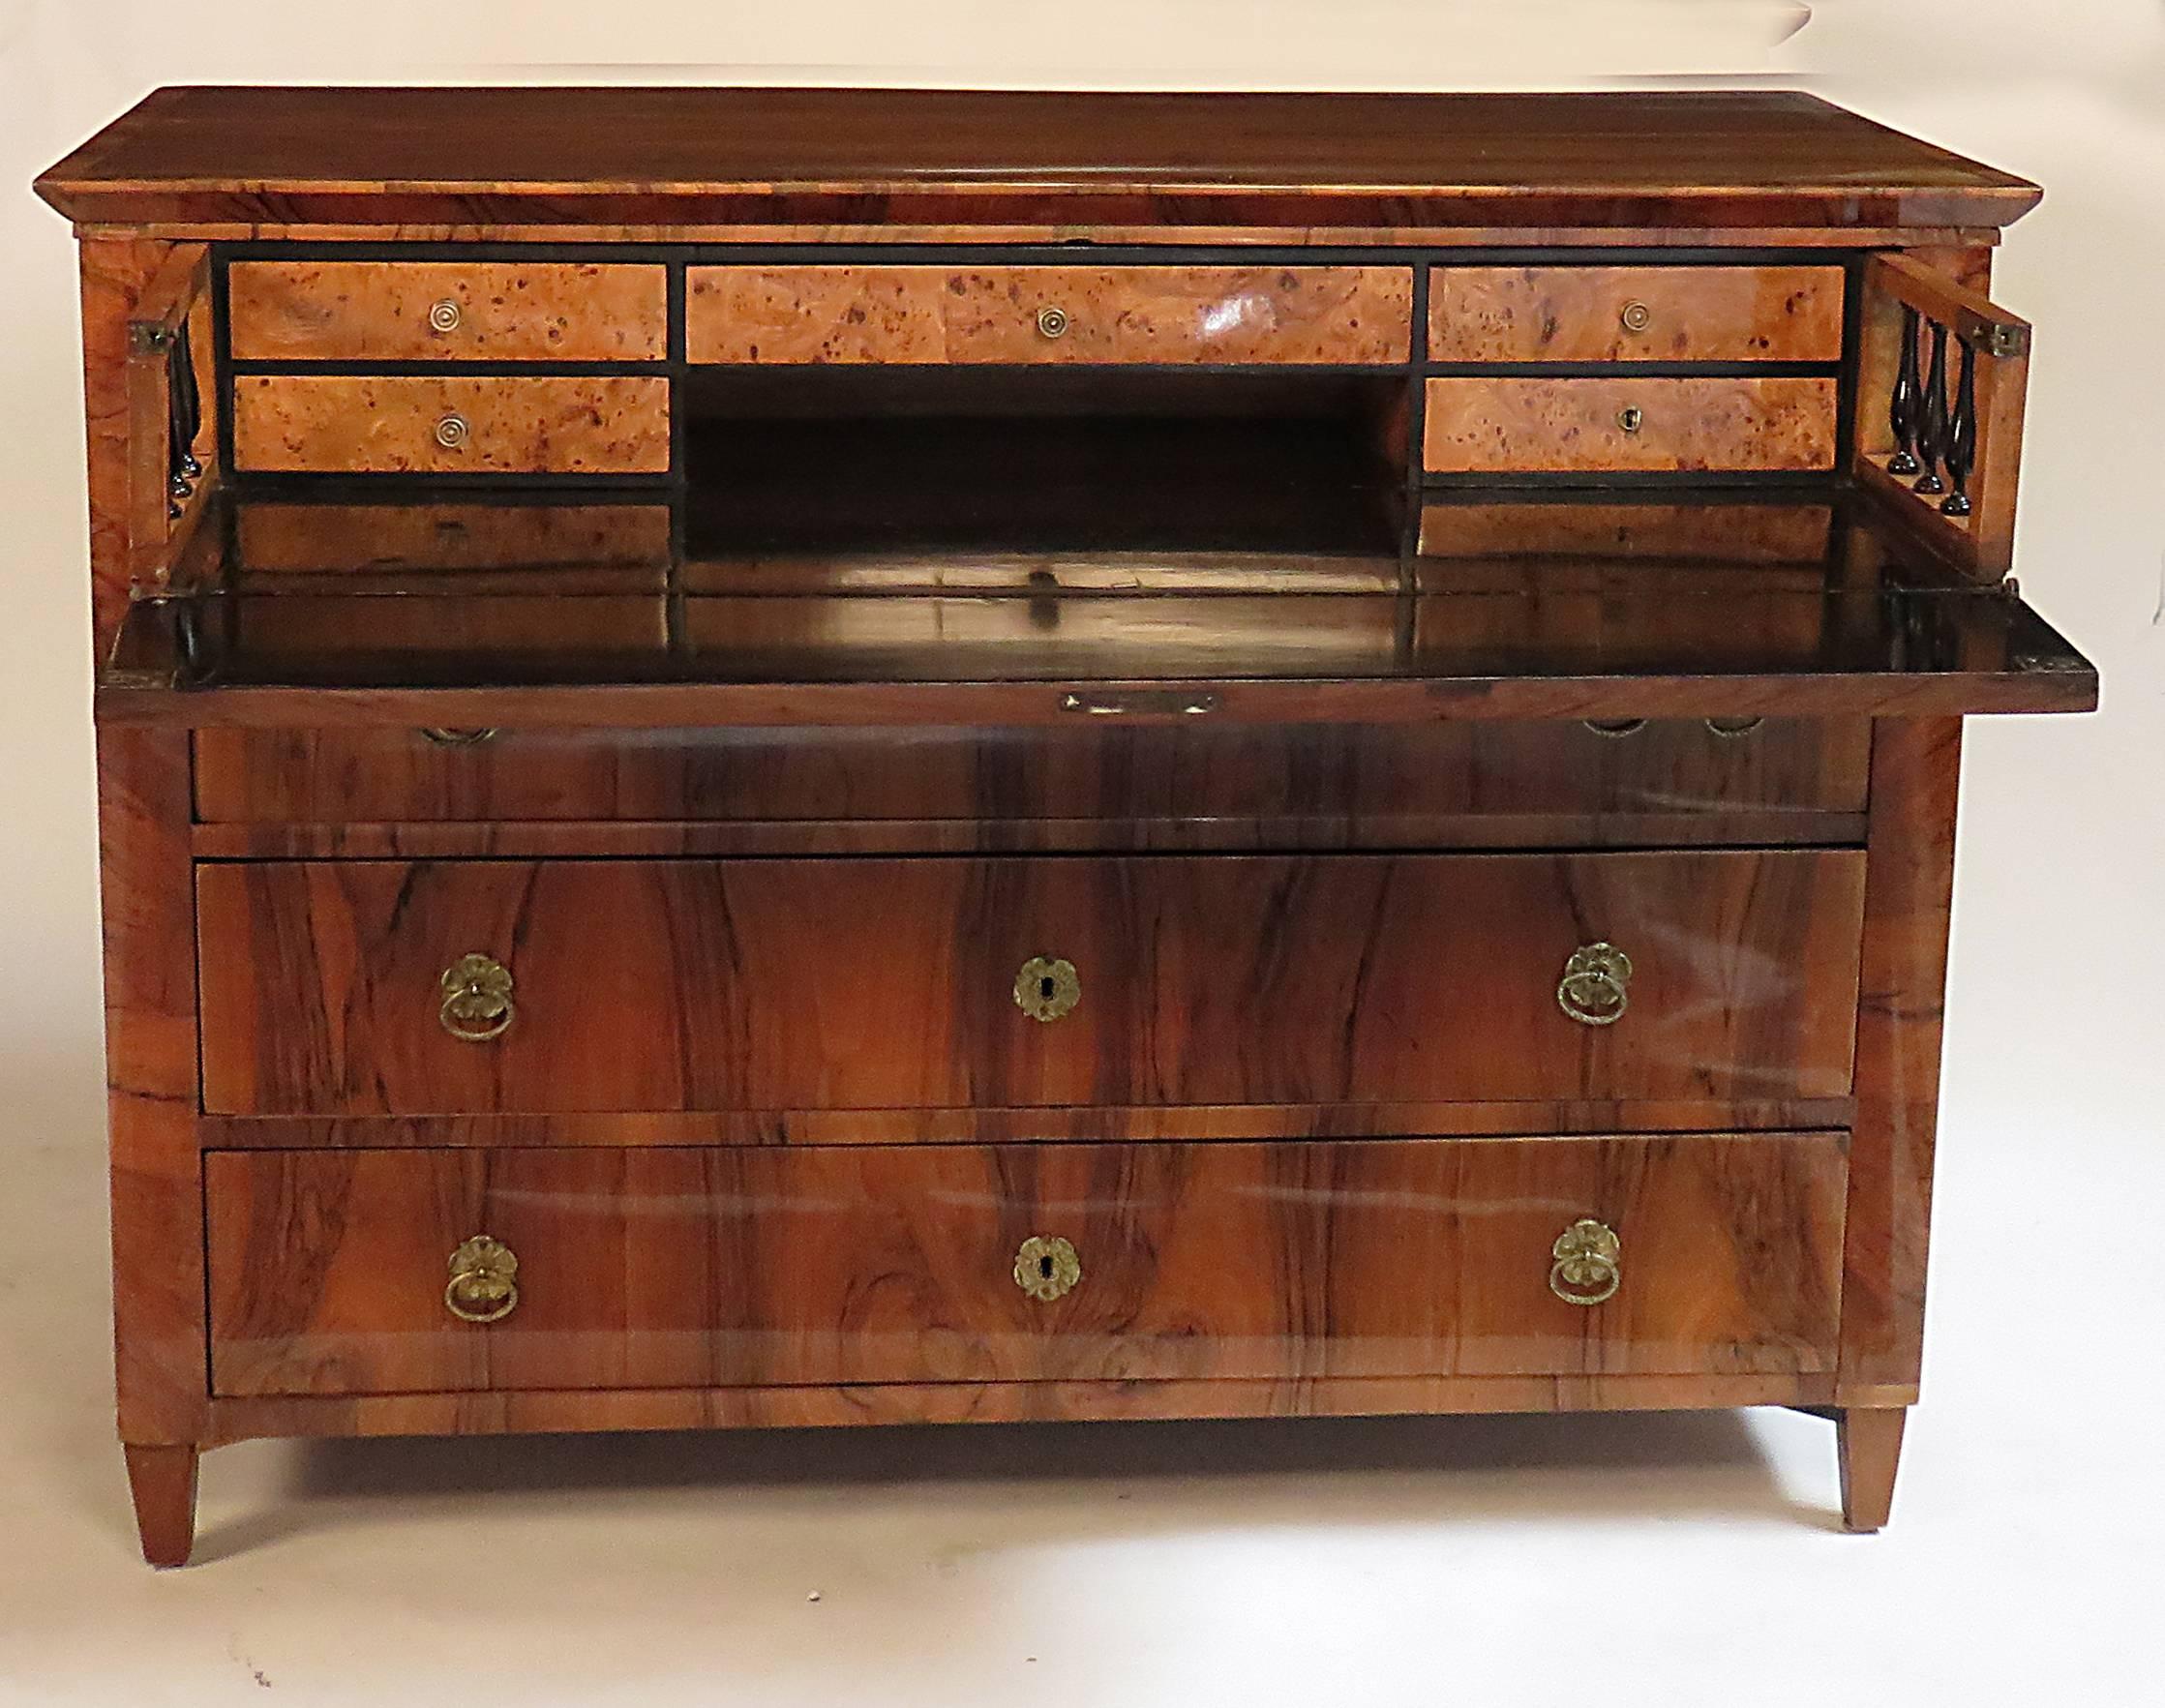 Tailored neoclassical figured walnut commode made in central Europe, probably Austria about 1830. Useful well fitted secretary drawer. Good larger size offering plenty of storage. The veneers are exceptional. The secretary drawer is ebonized with